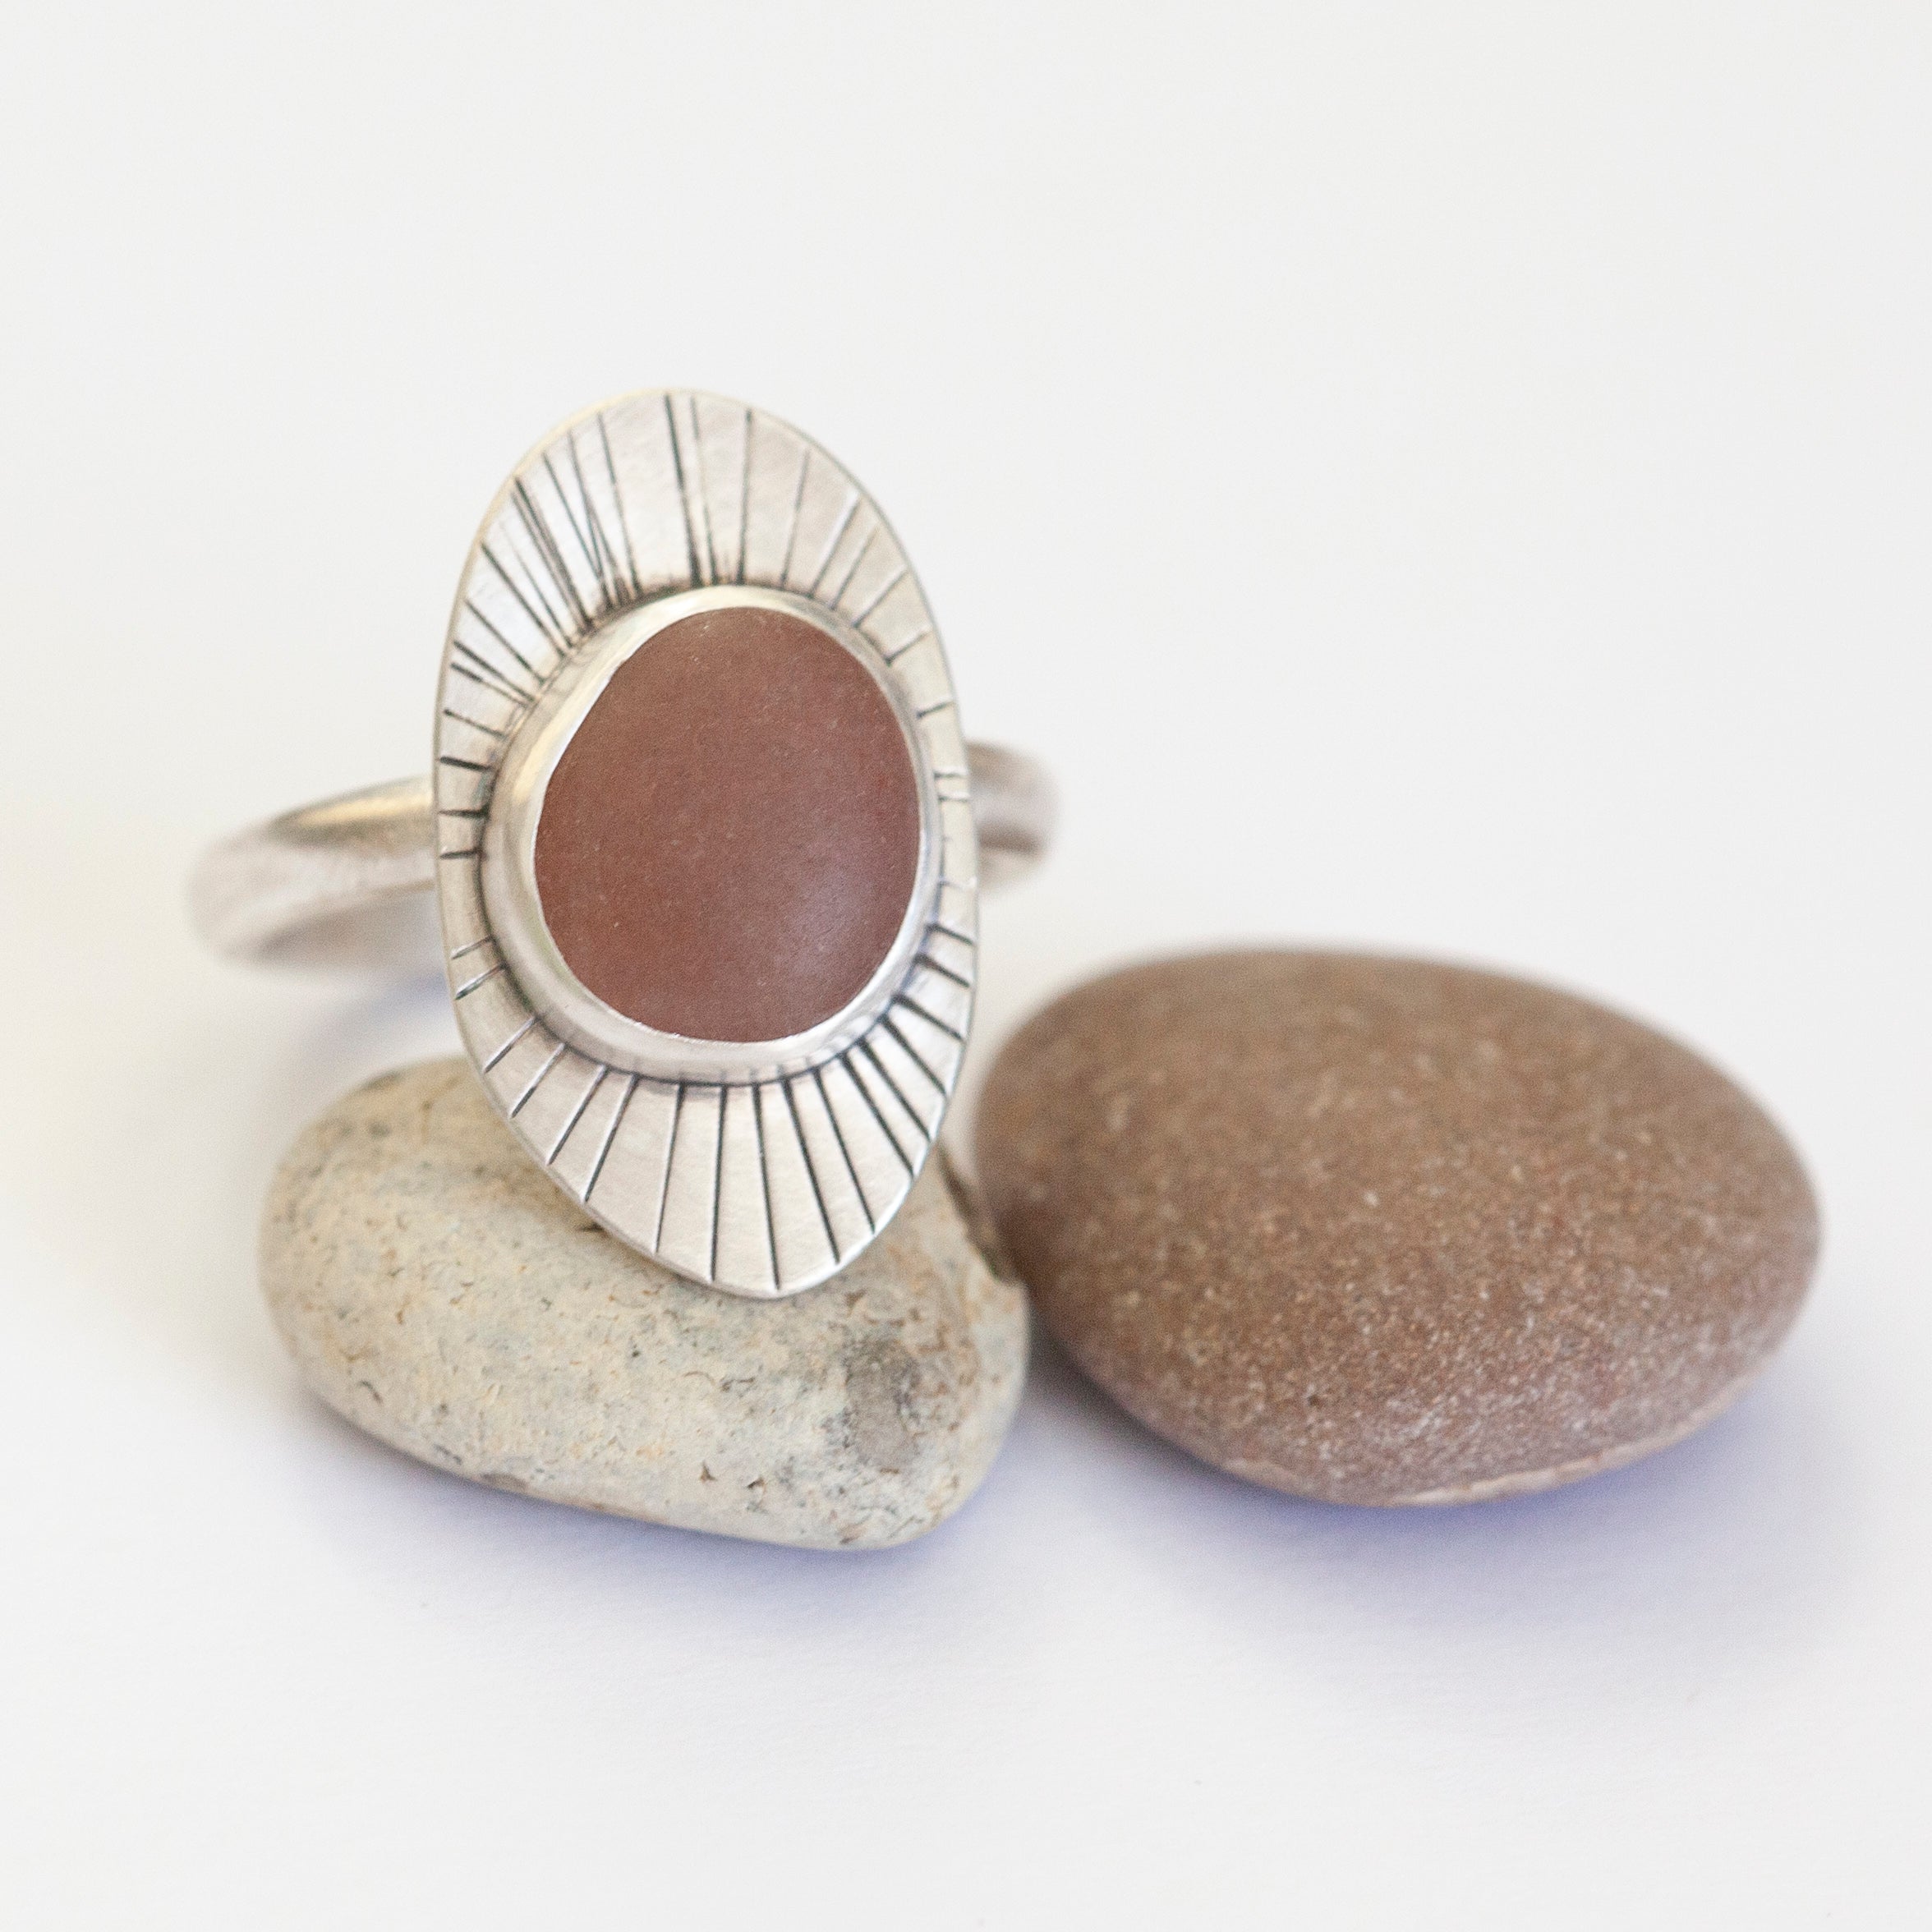 OOAK intuition ring with soft pink pebble ~ Size 54,75 (ready-to-ship)